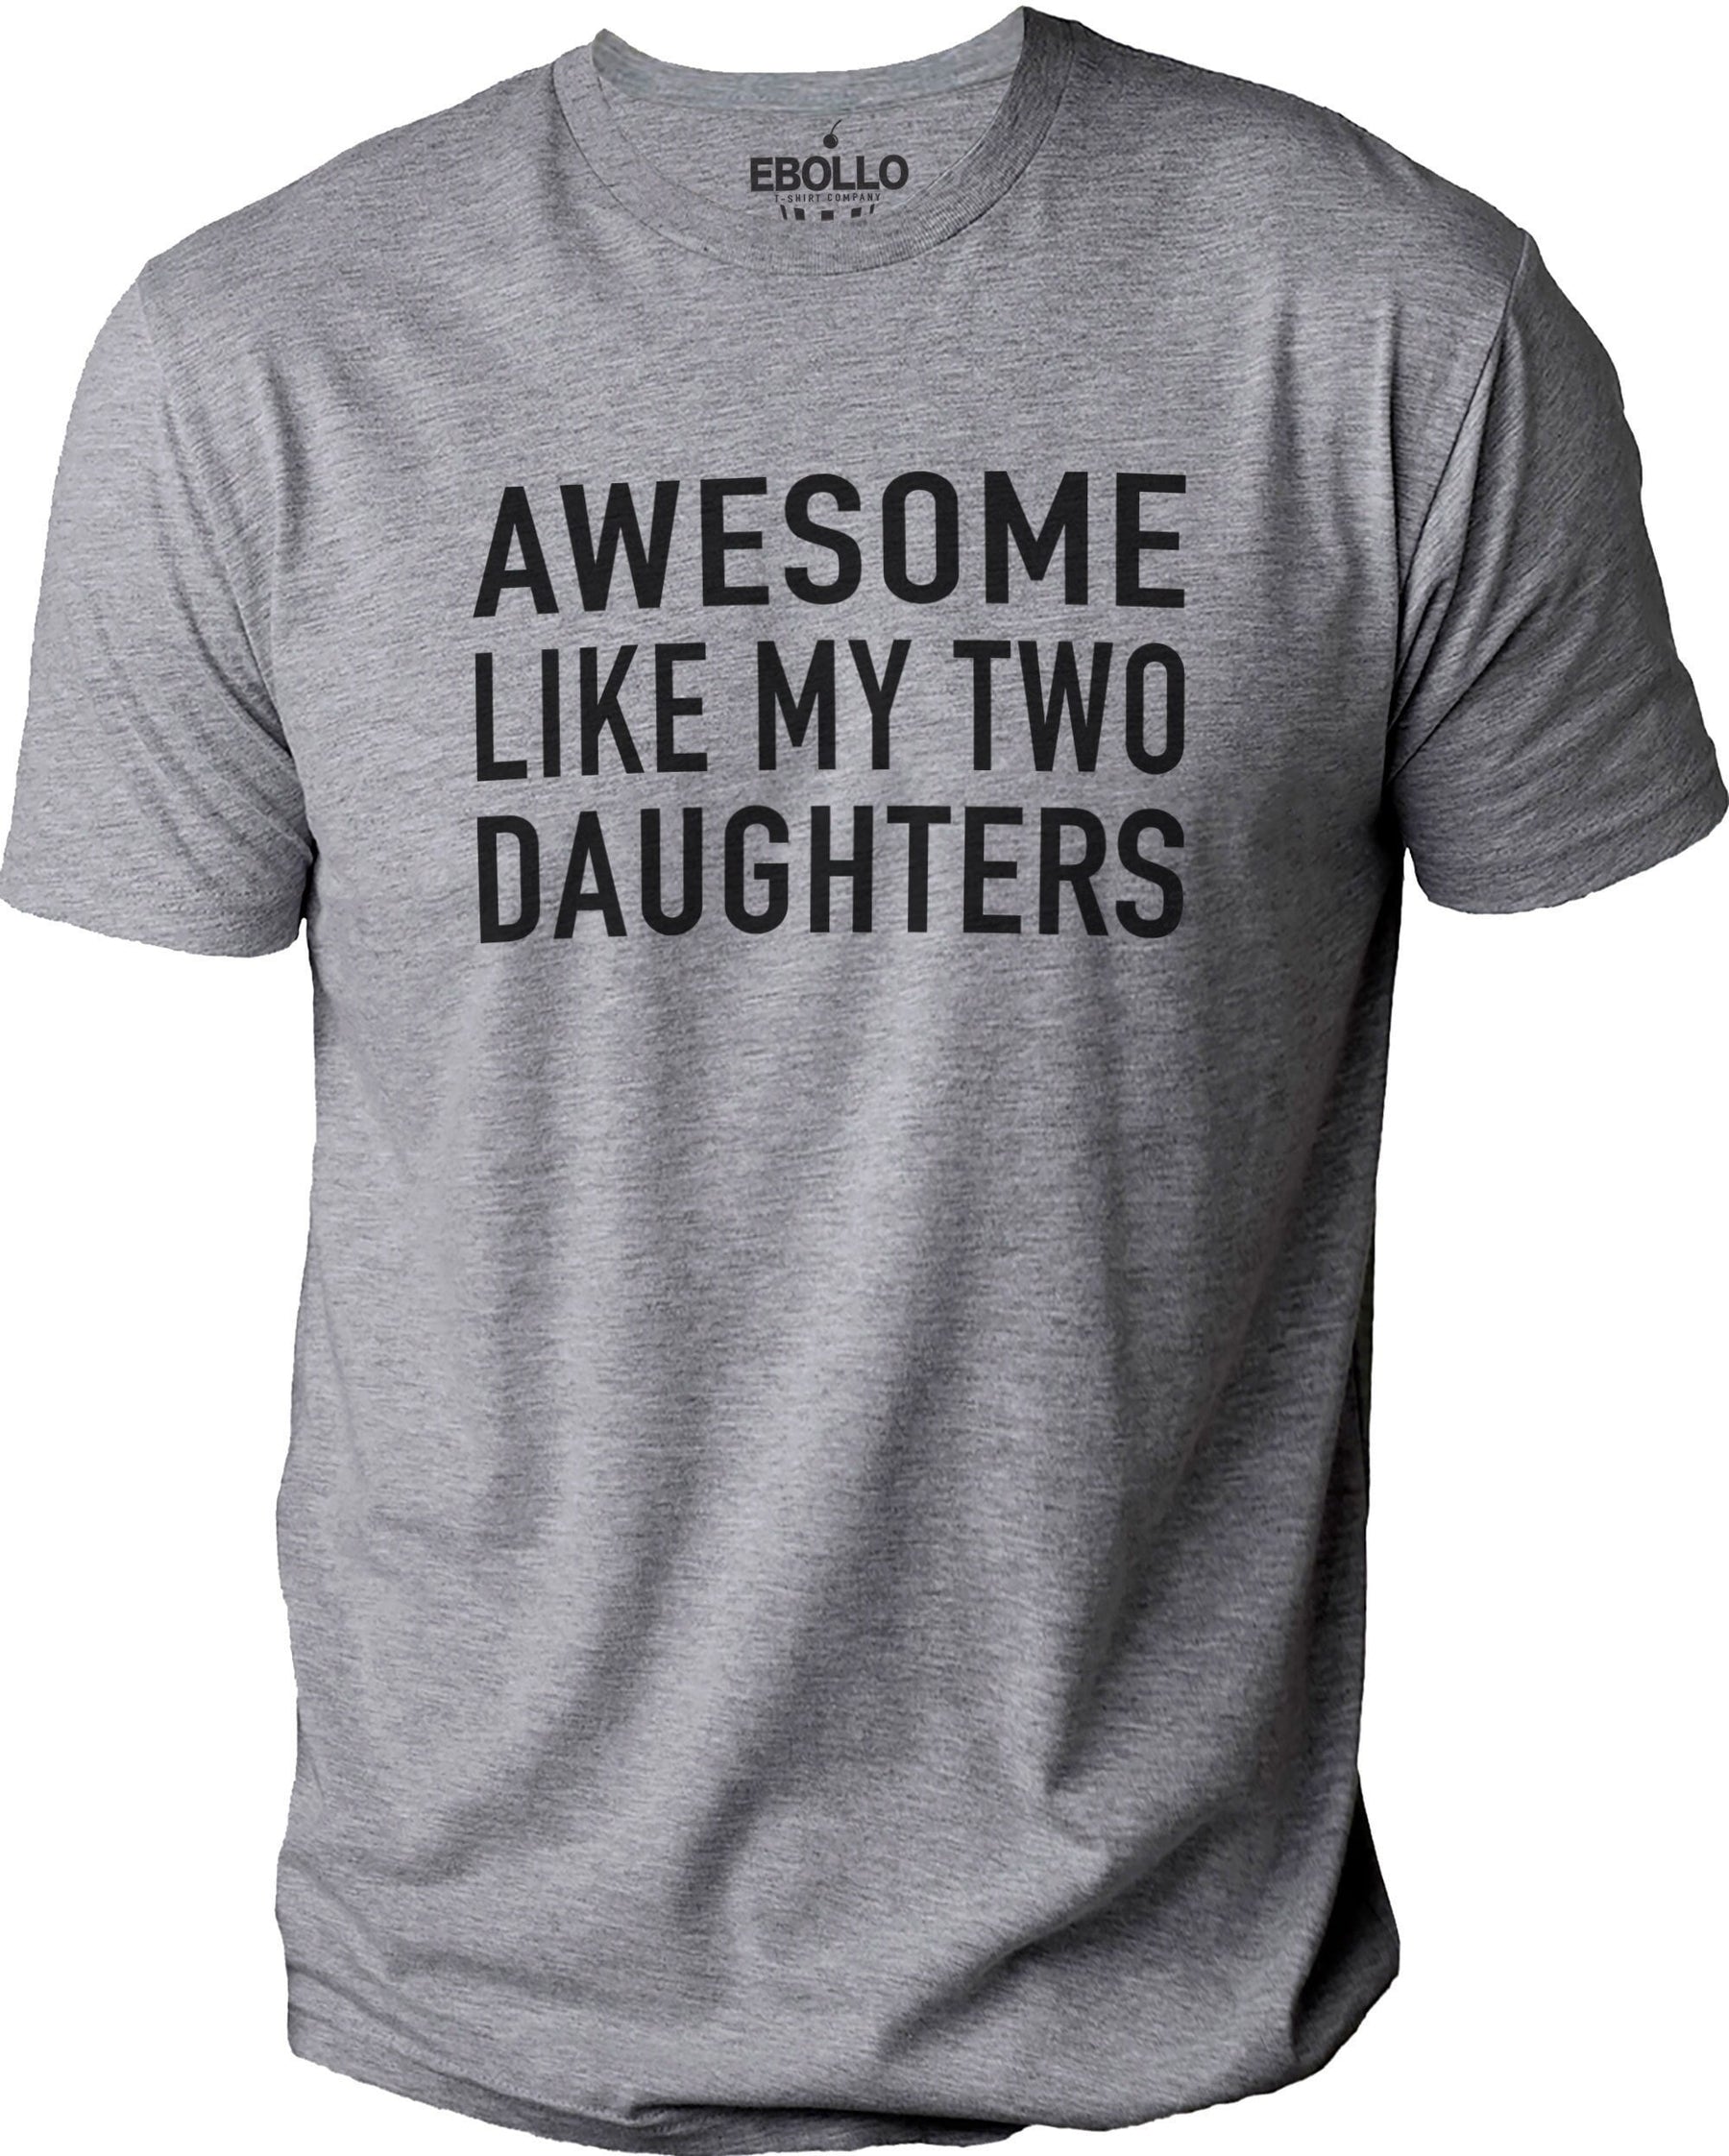 Awesome Like My Two Daughters Shirt